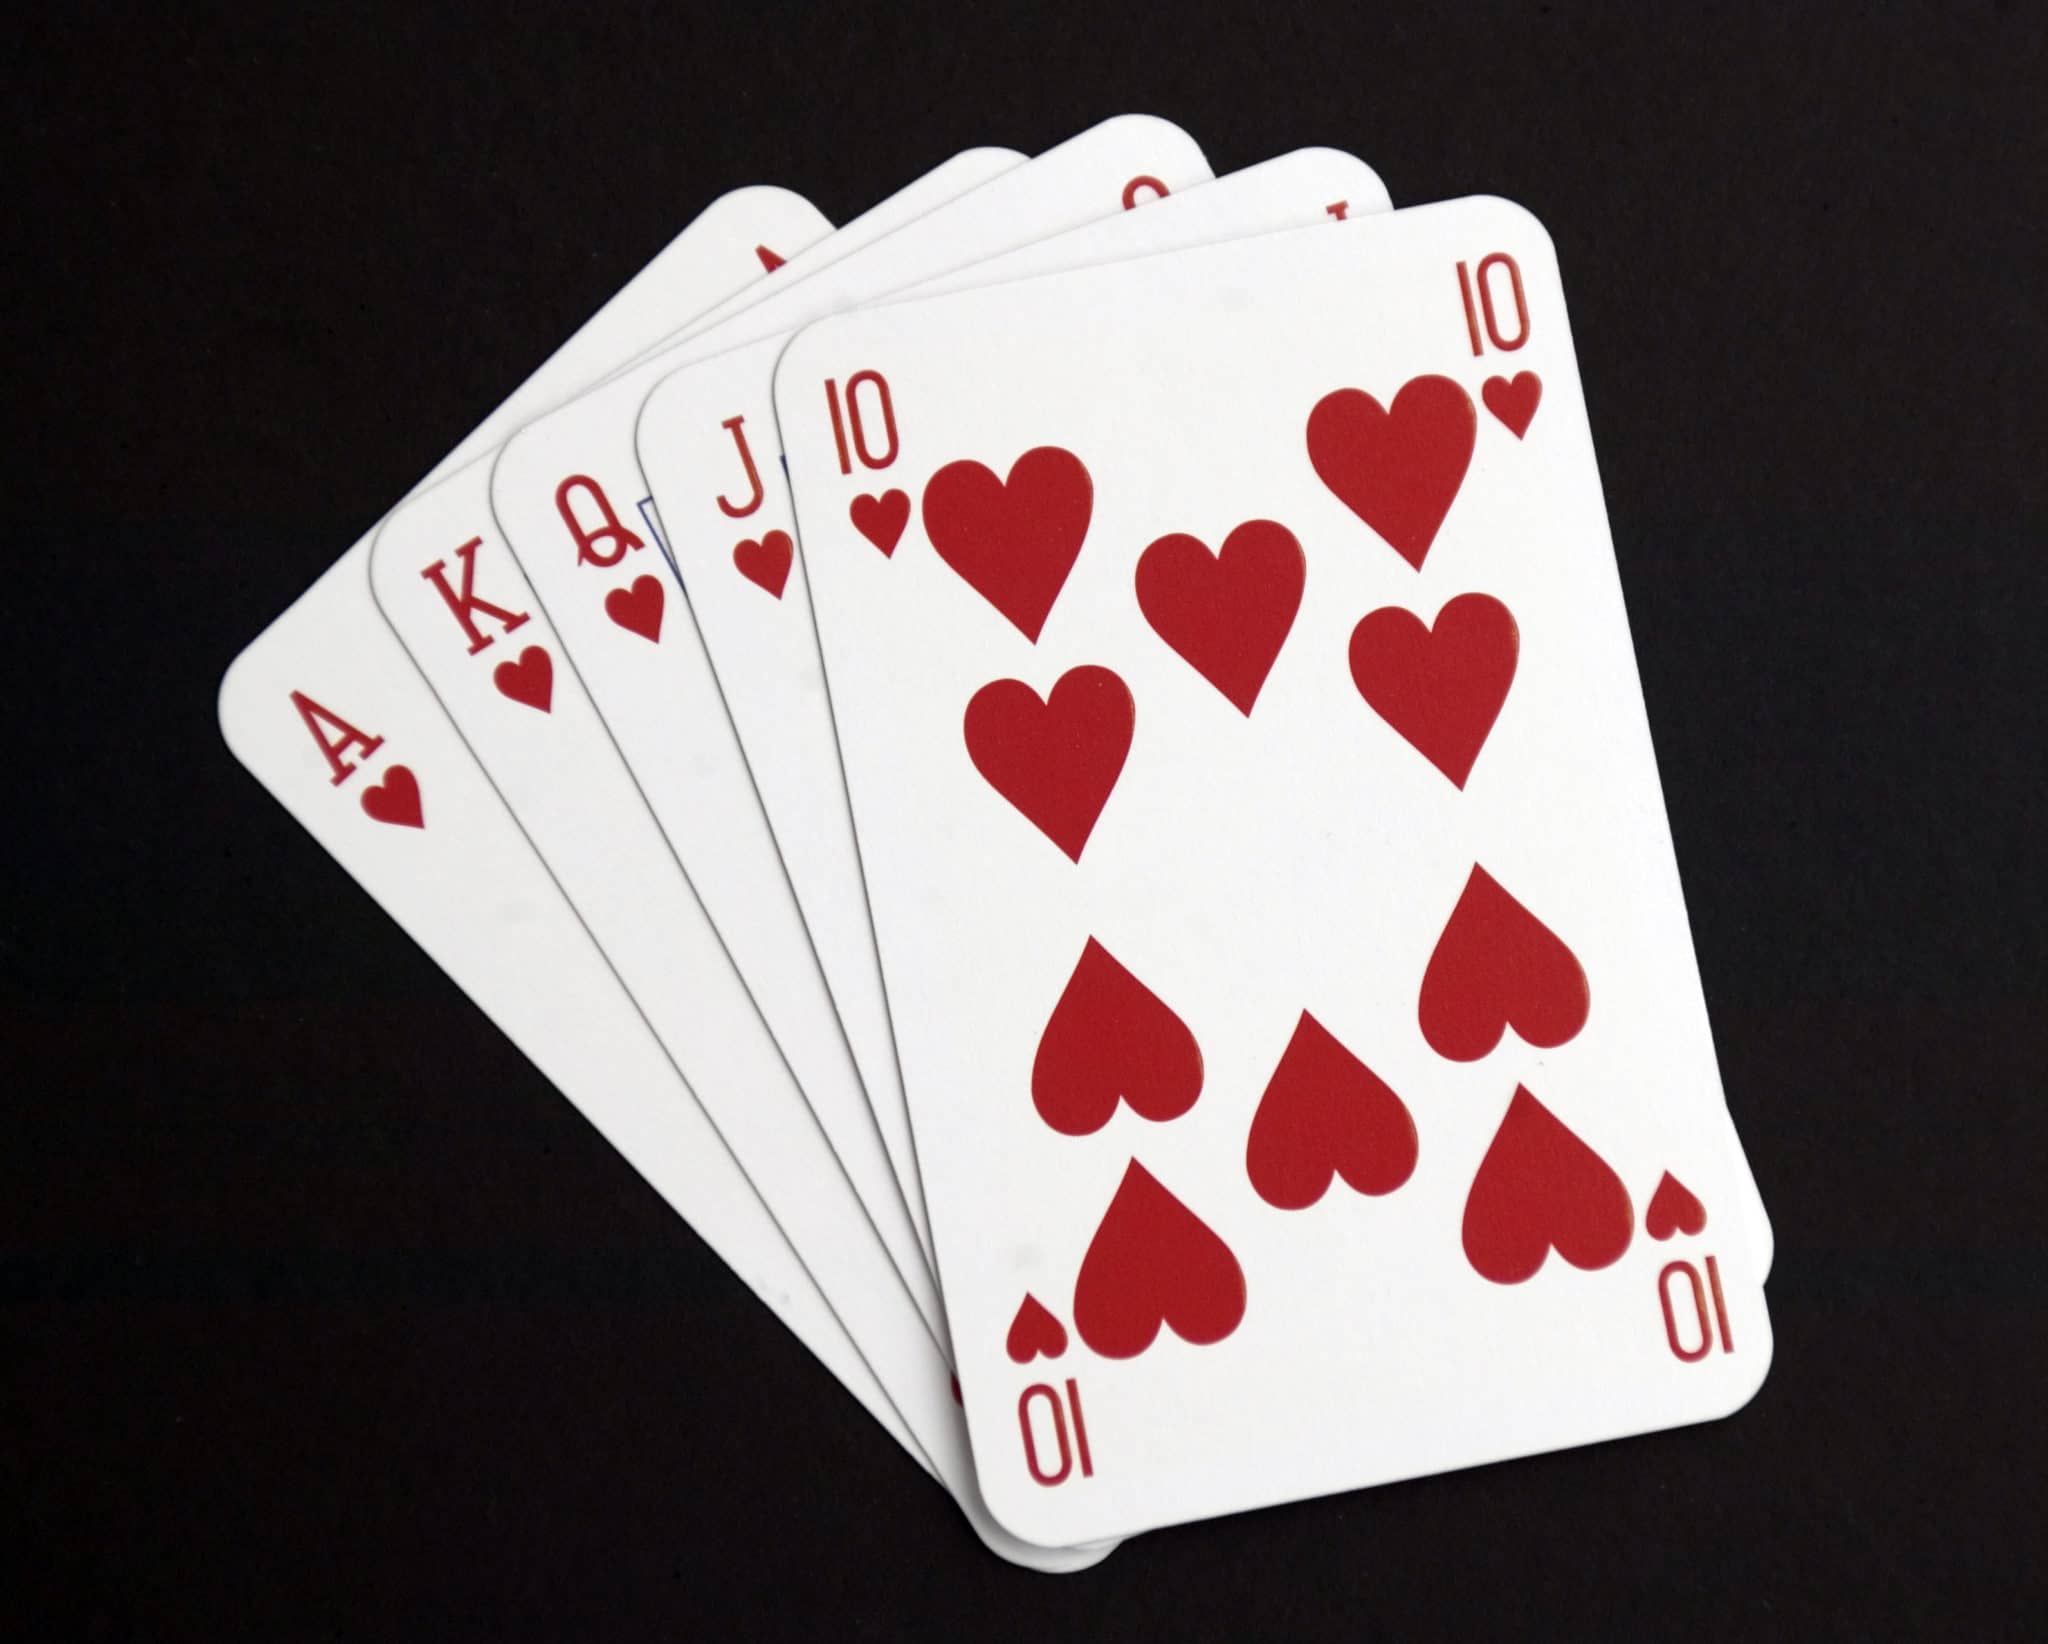 What are the odds of hitting a Royal Flush in Casino Hold 'em?